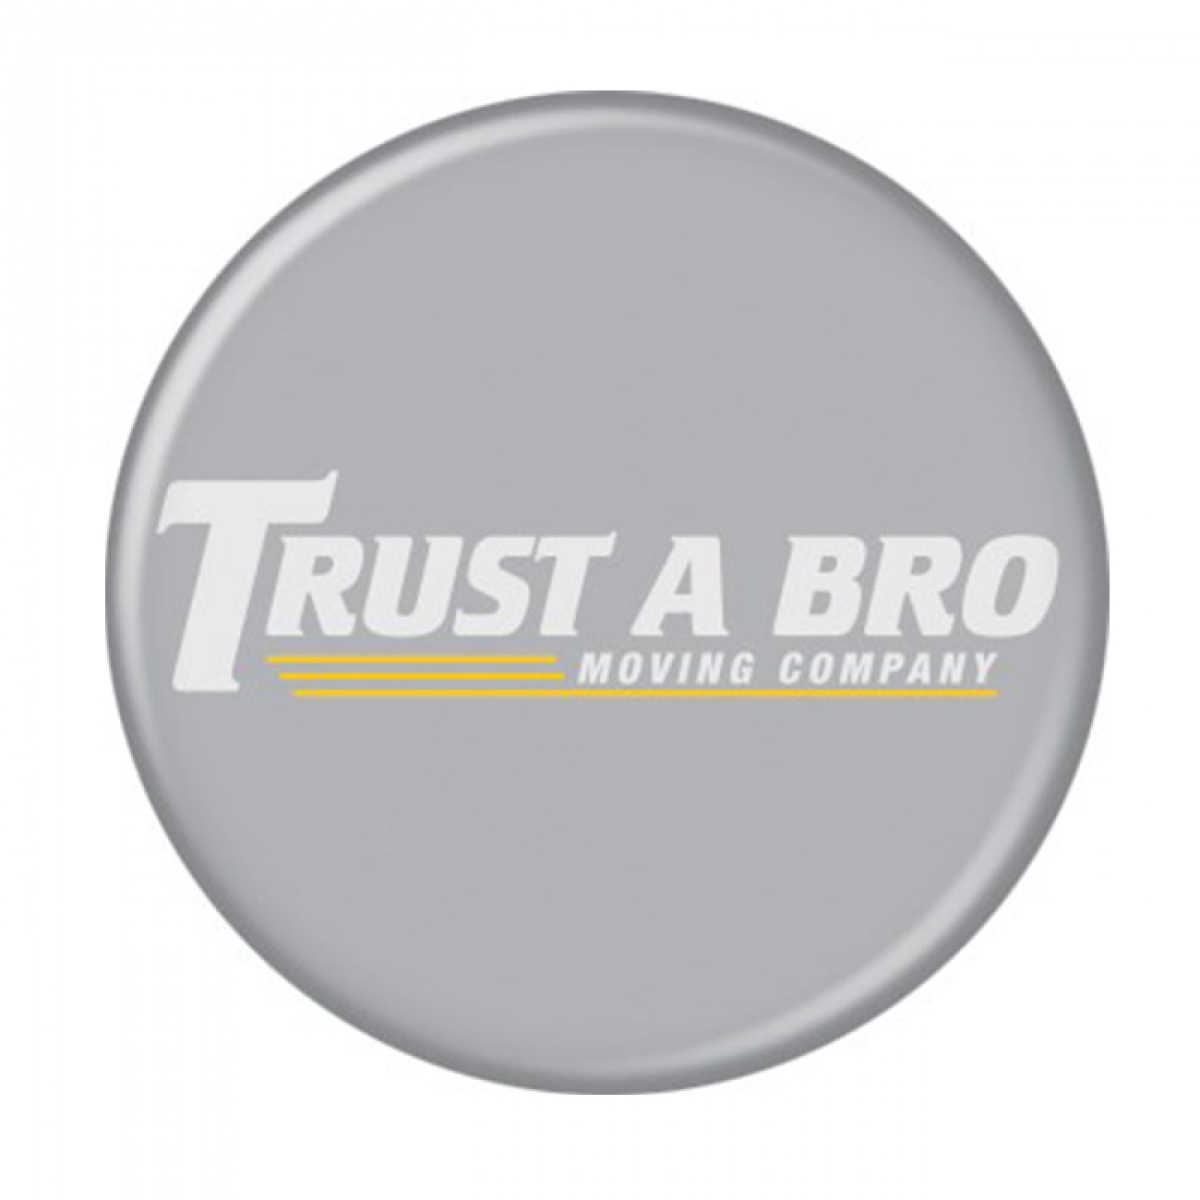 Picture of Hawkeye 837968 Marvel Studios Series Trust a Bro Moving Company Button